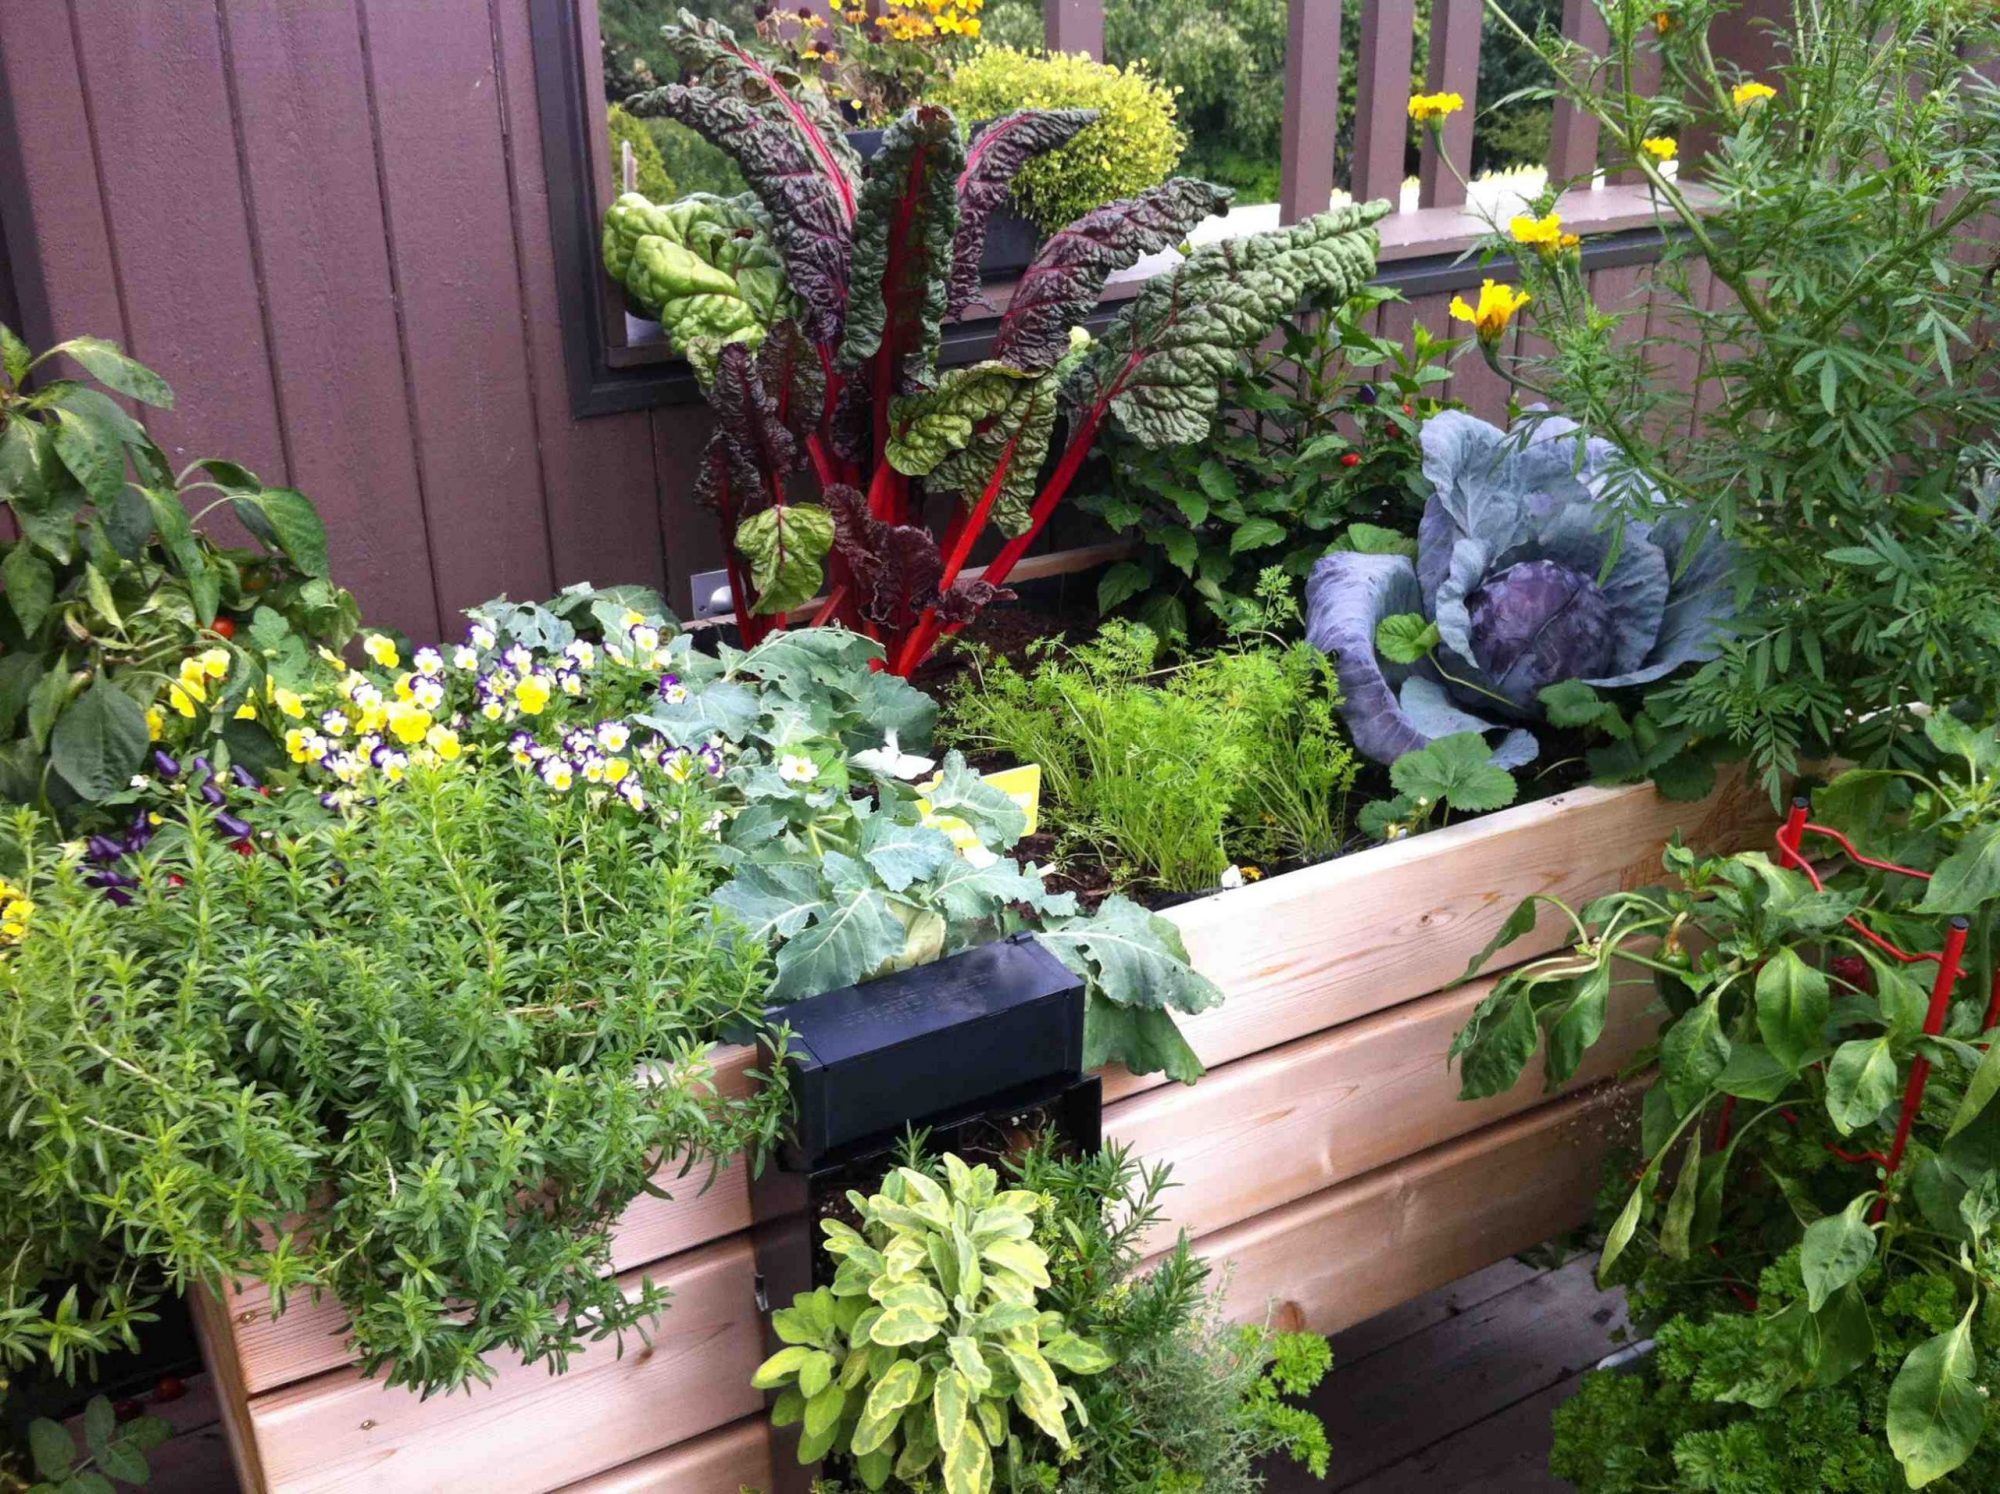 Enough with Winter! April is the Perfect Time to Start Your Spring Vegetable Garden!